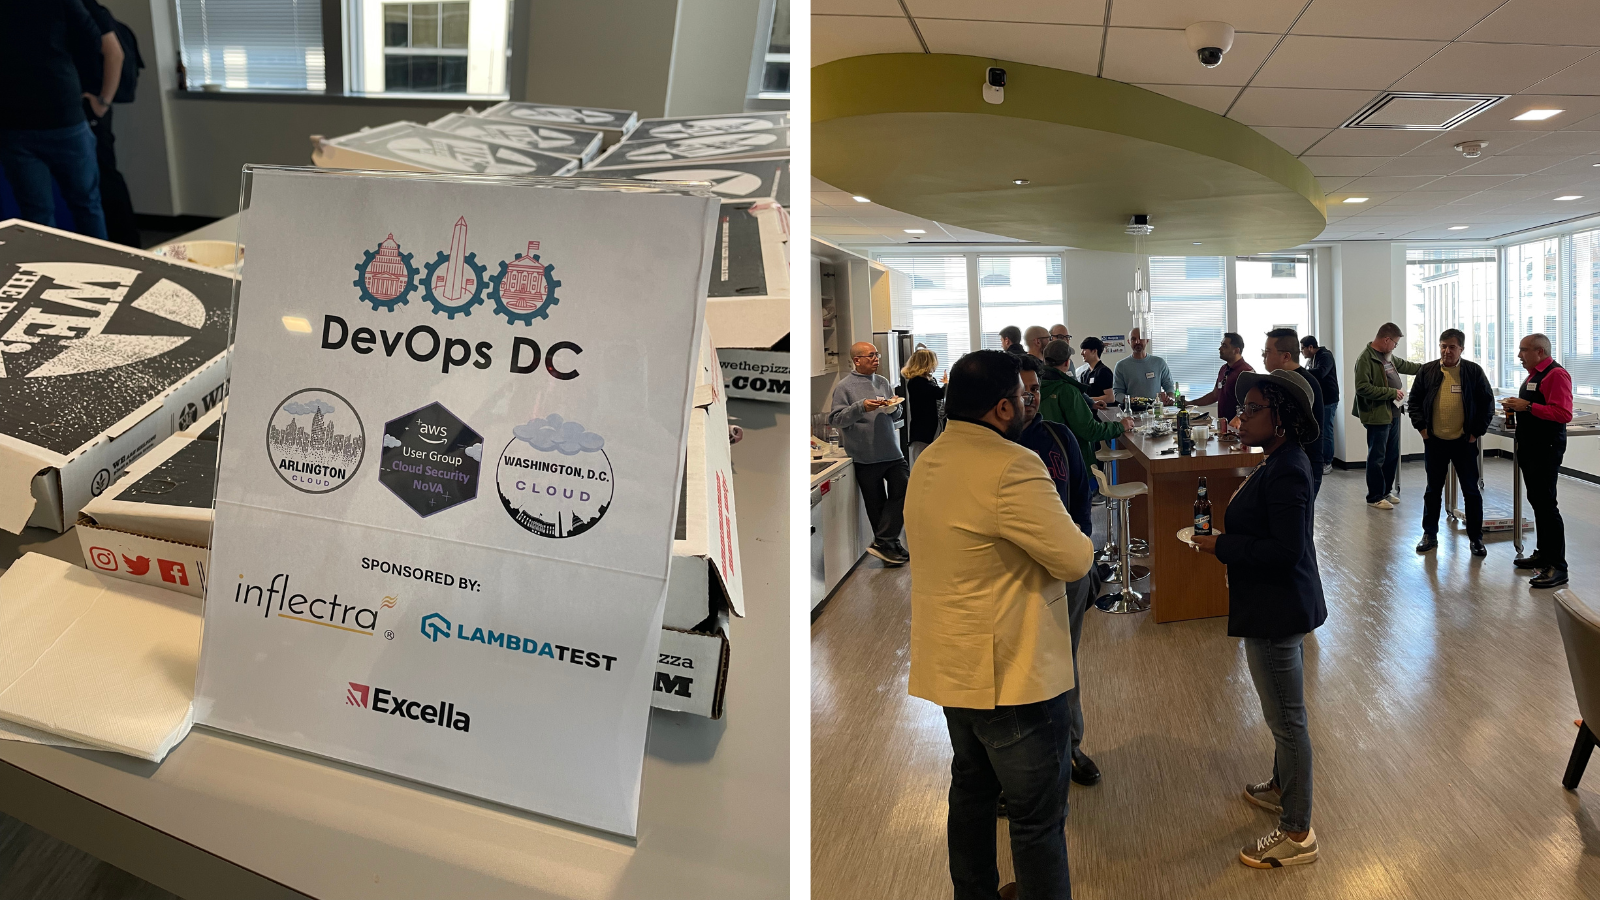 Collage of side by side images: (Left) Flyer for DevOps DC user group meetup in Arlington, VA in front of pizza. Sponsored by Inflectra, Lambdatest, and Excella. (Right) attendees networking in kitchen area.